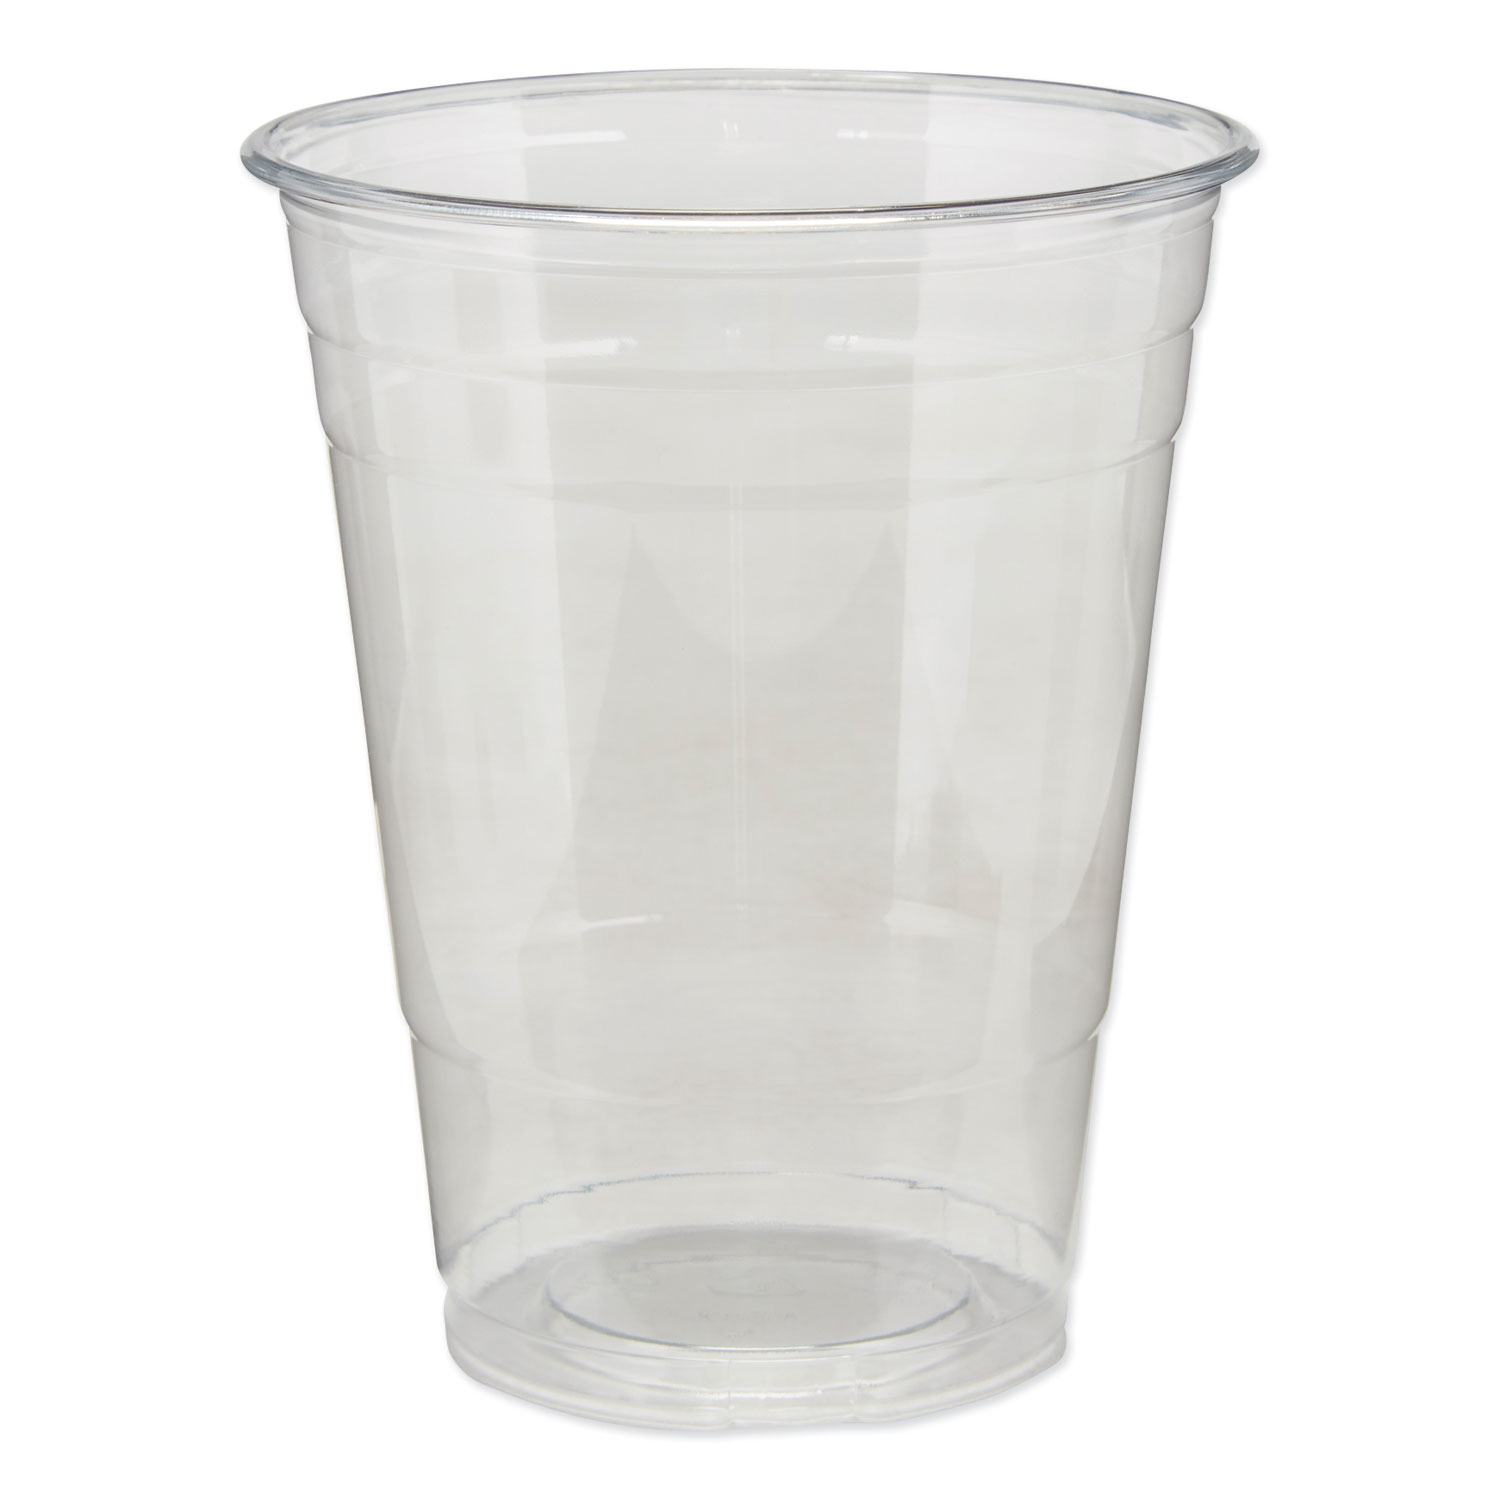  Dixie CPET16DX Clear Plastic PETE Cups, Cold, 16oz, 25/Sleeve, 20 Sleeves/Carton (DXECPET16DX) 